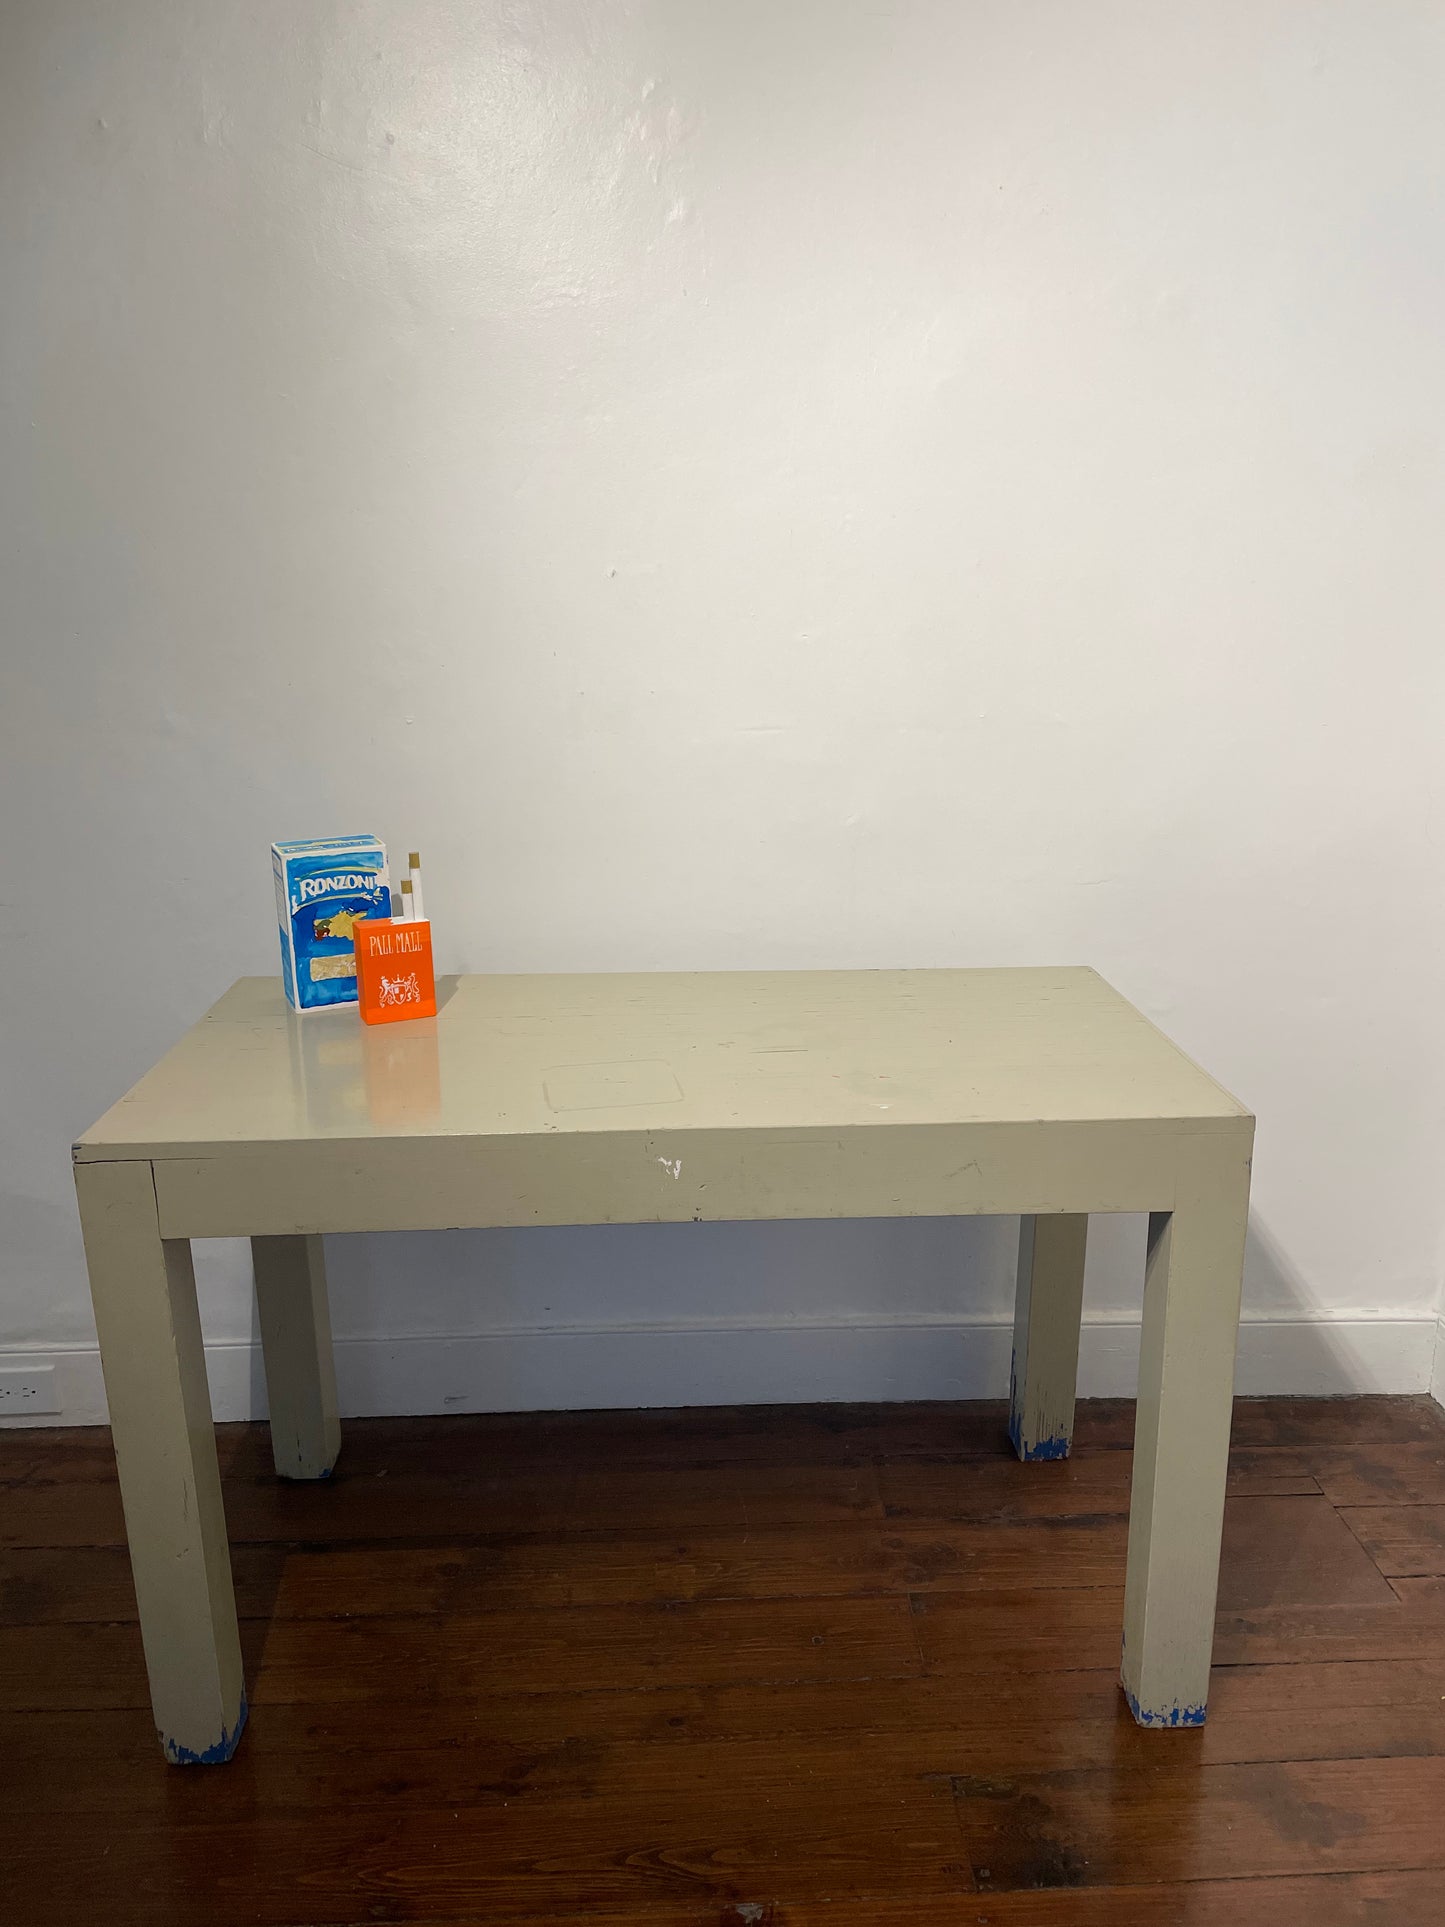 IN STORE: Vintage Parsons table